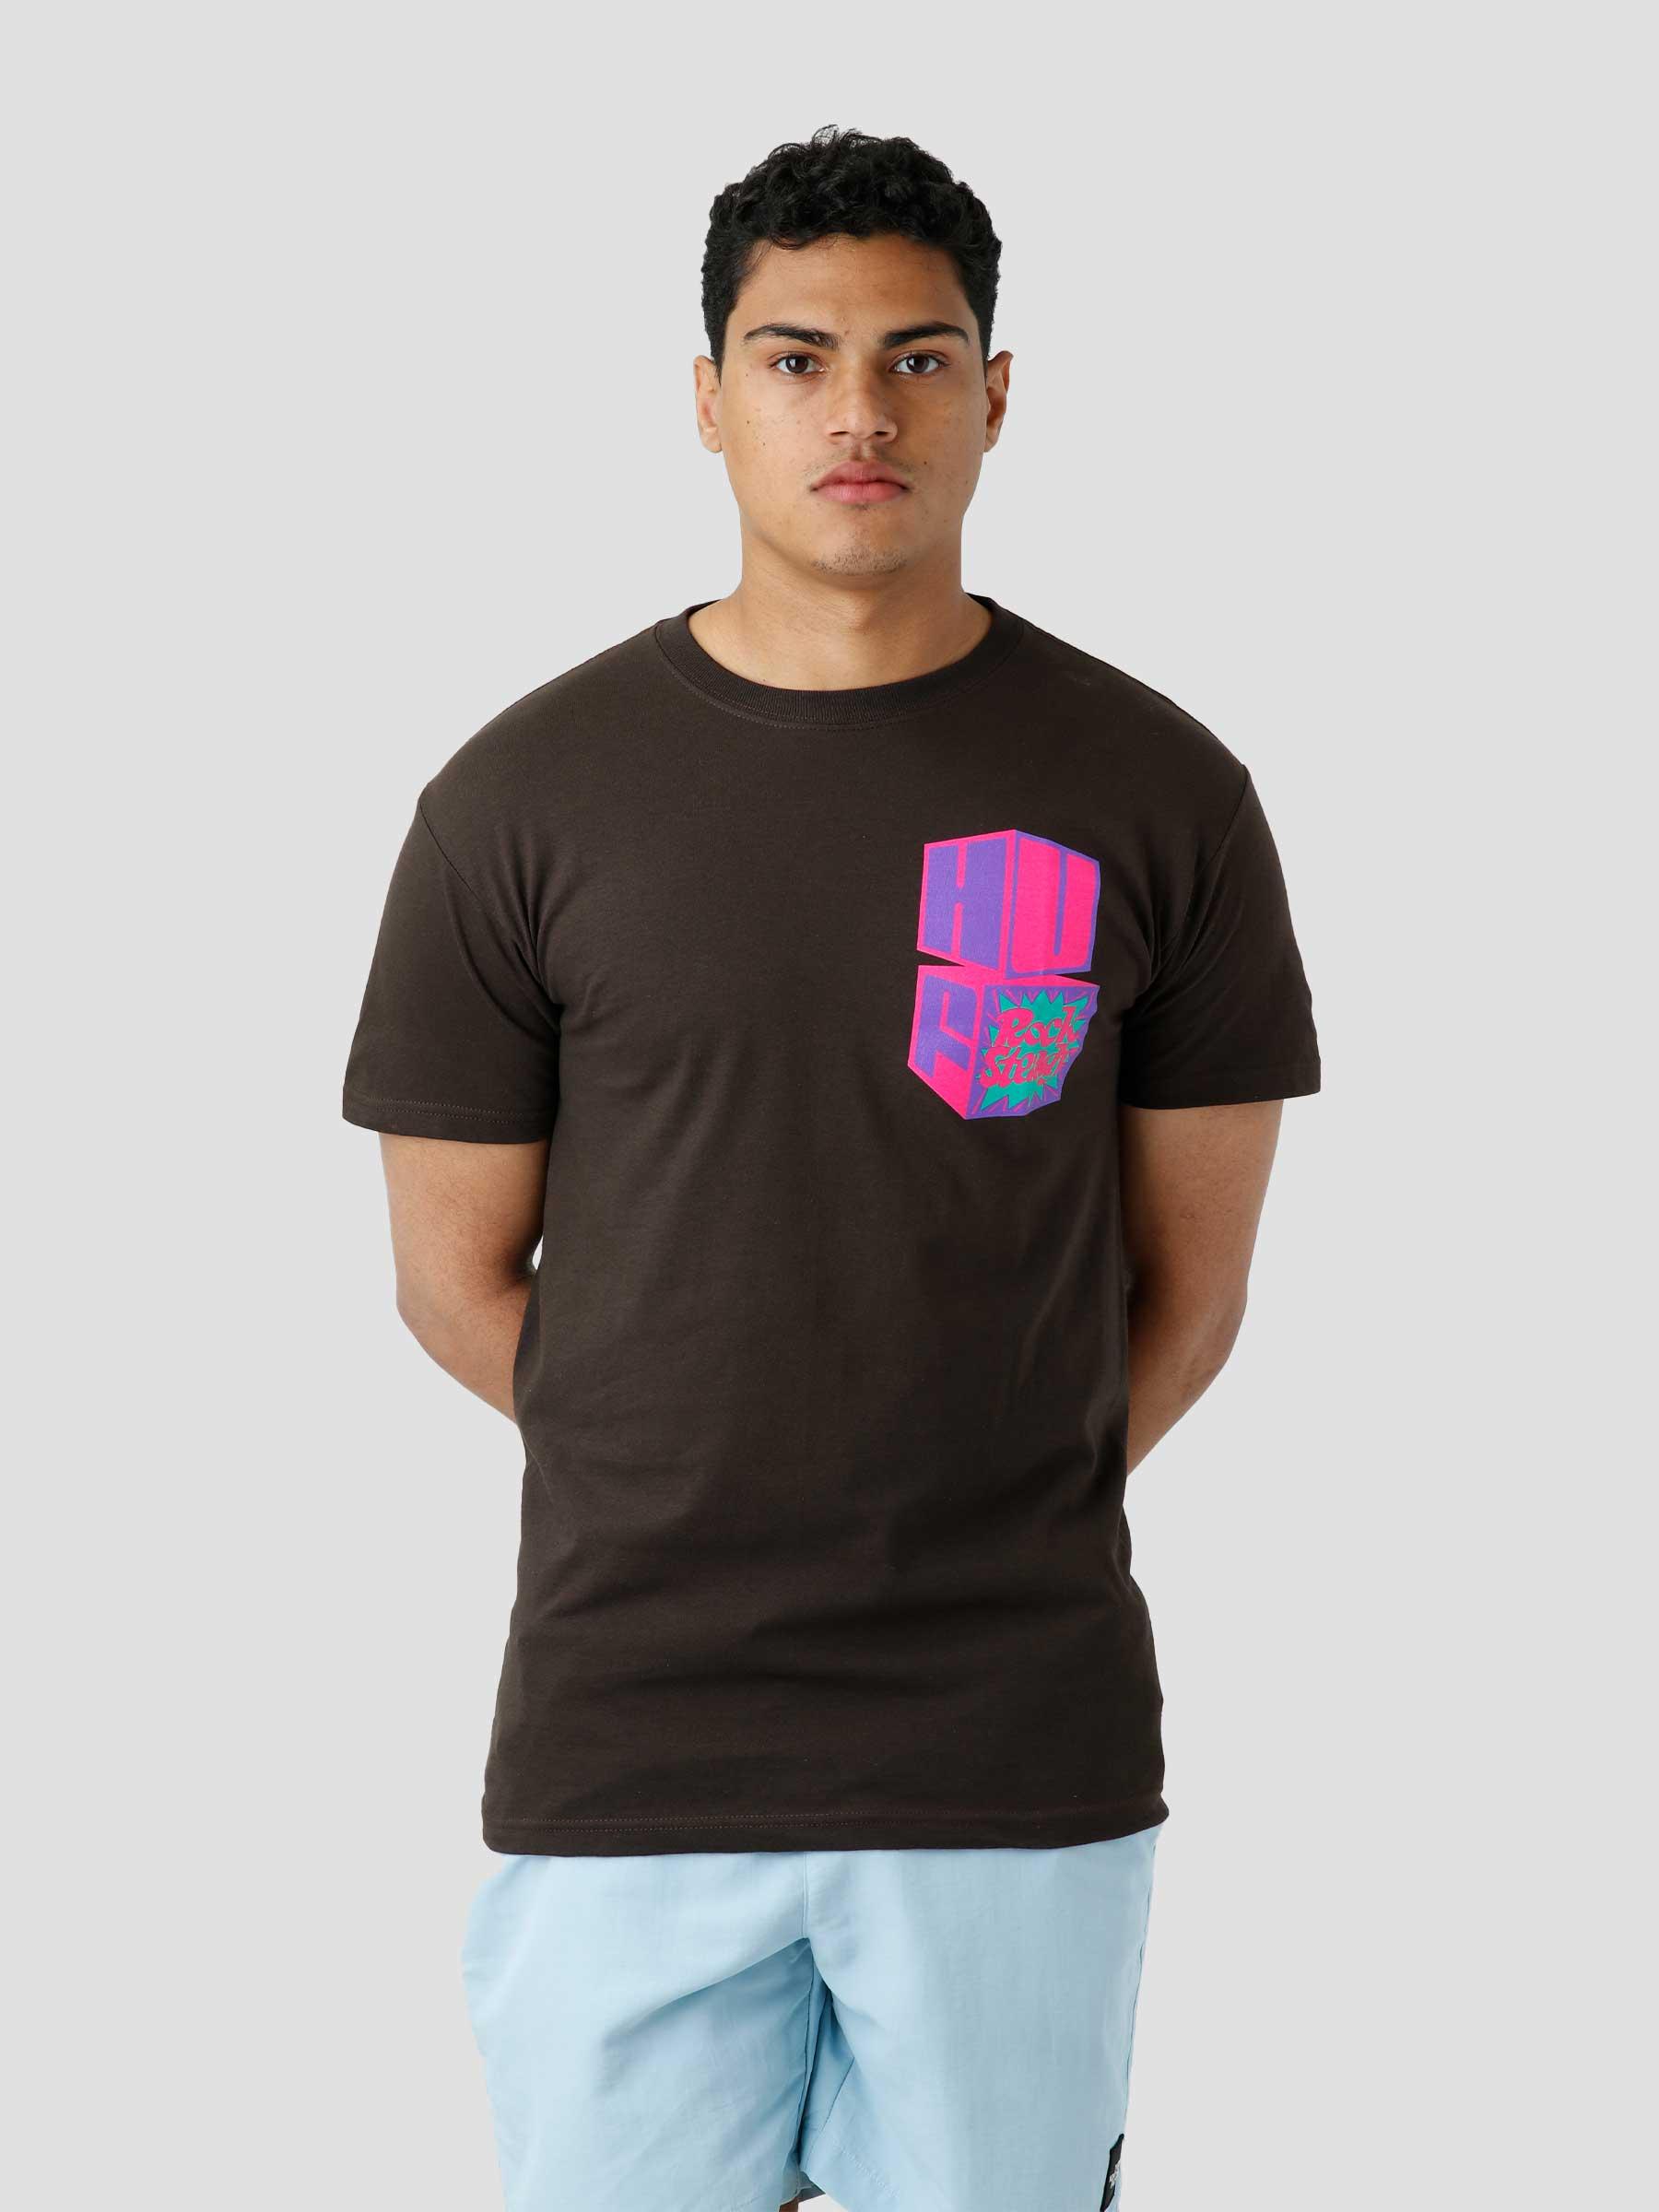 High Note S/S T-Shirt Chocolate TS01654